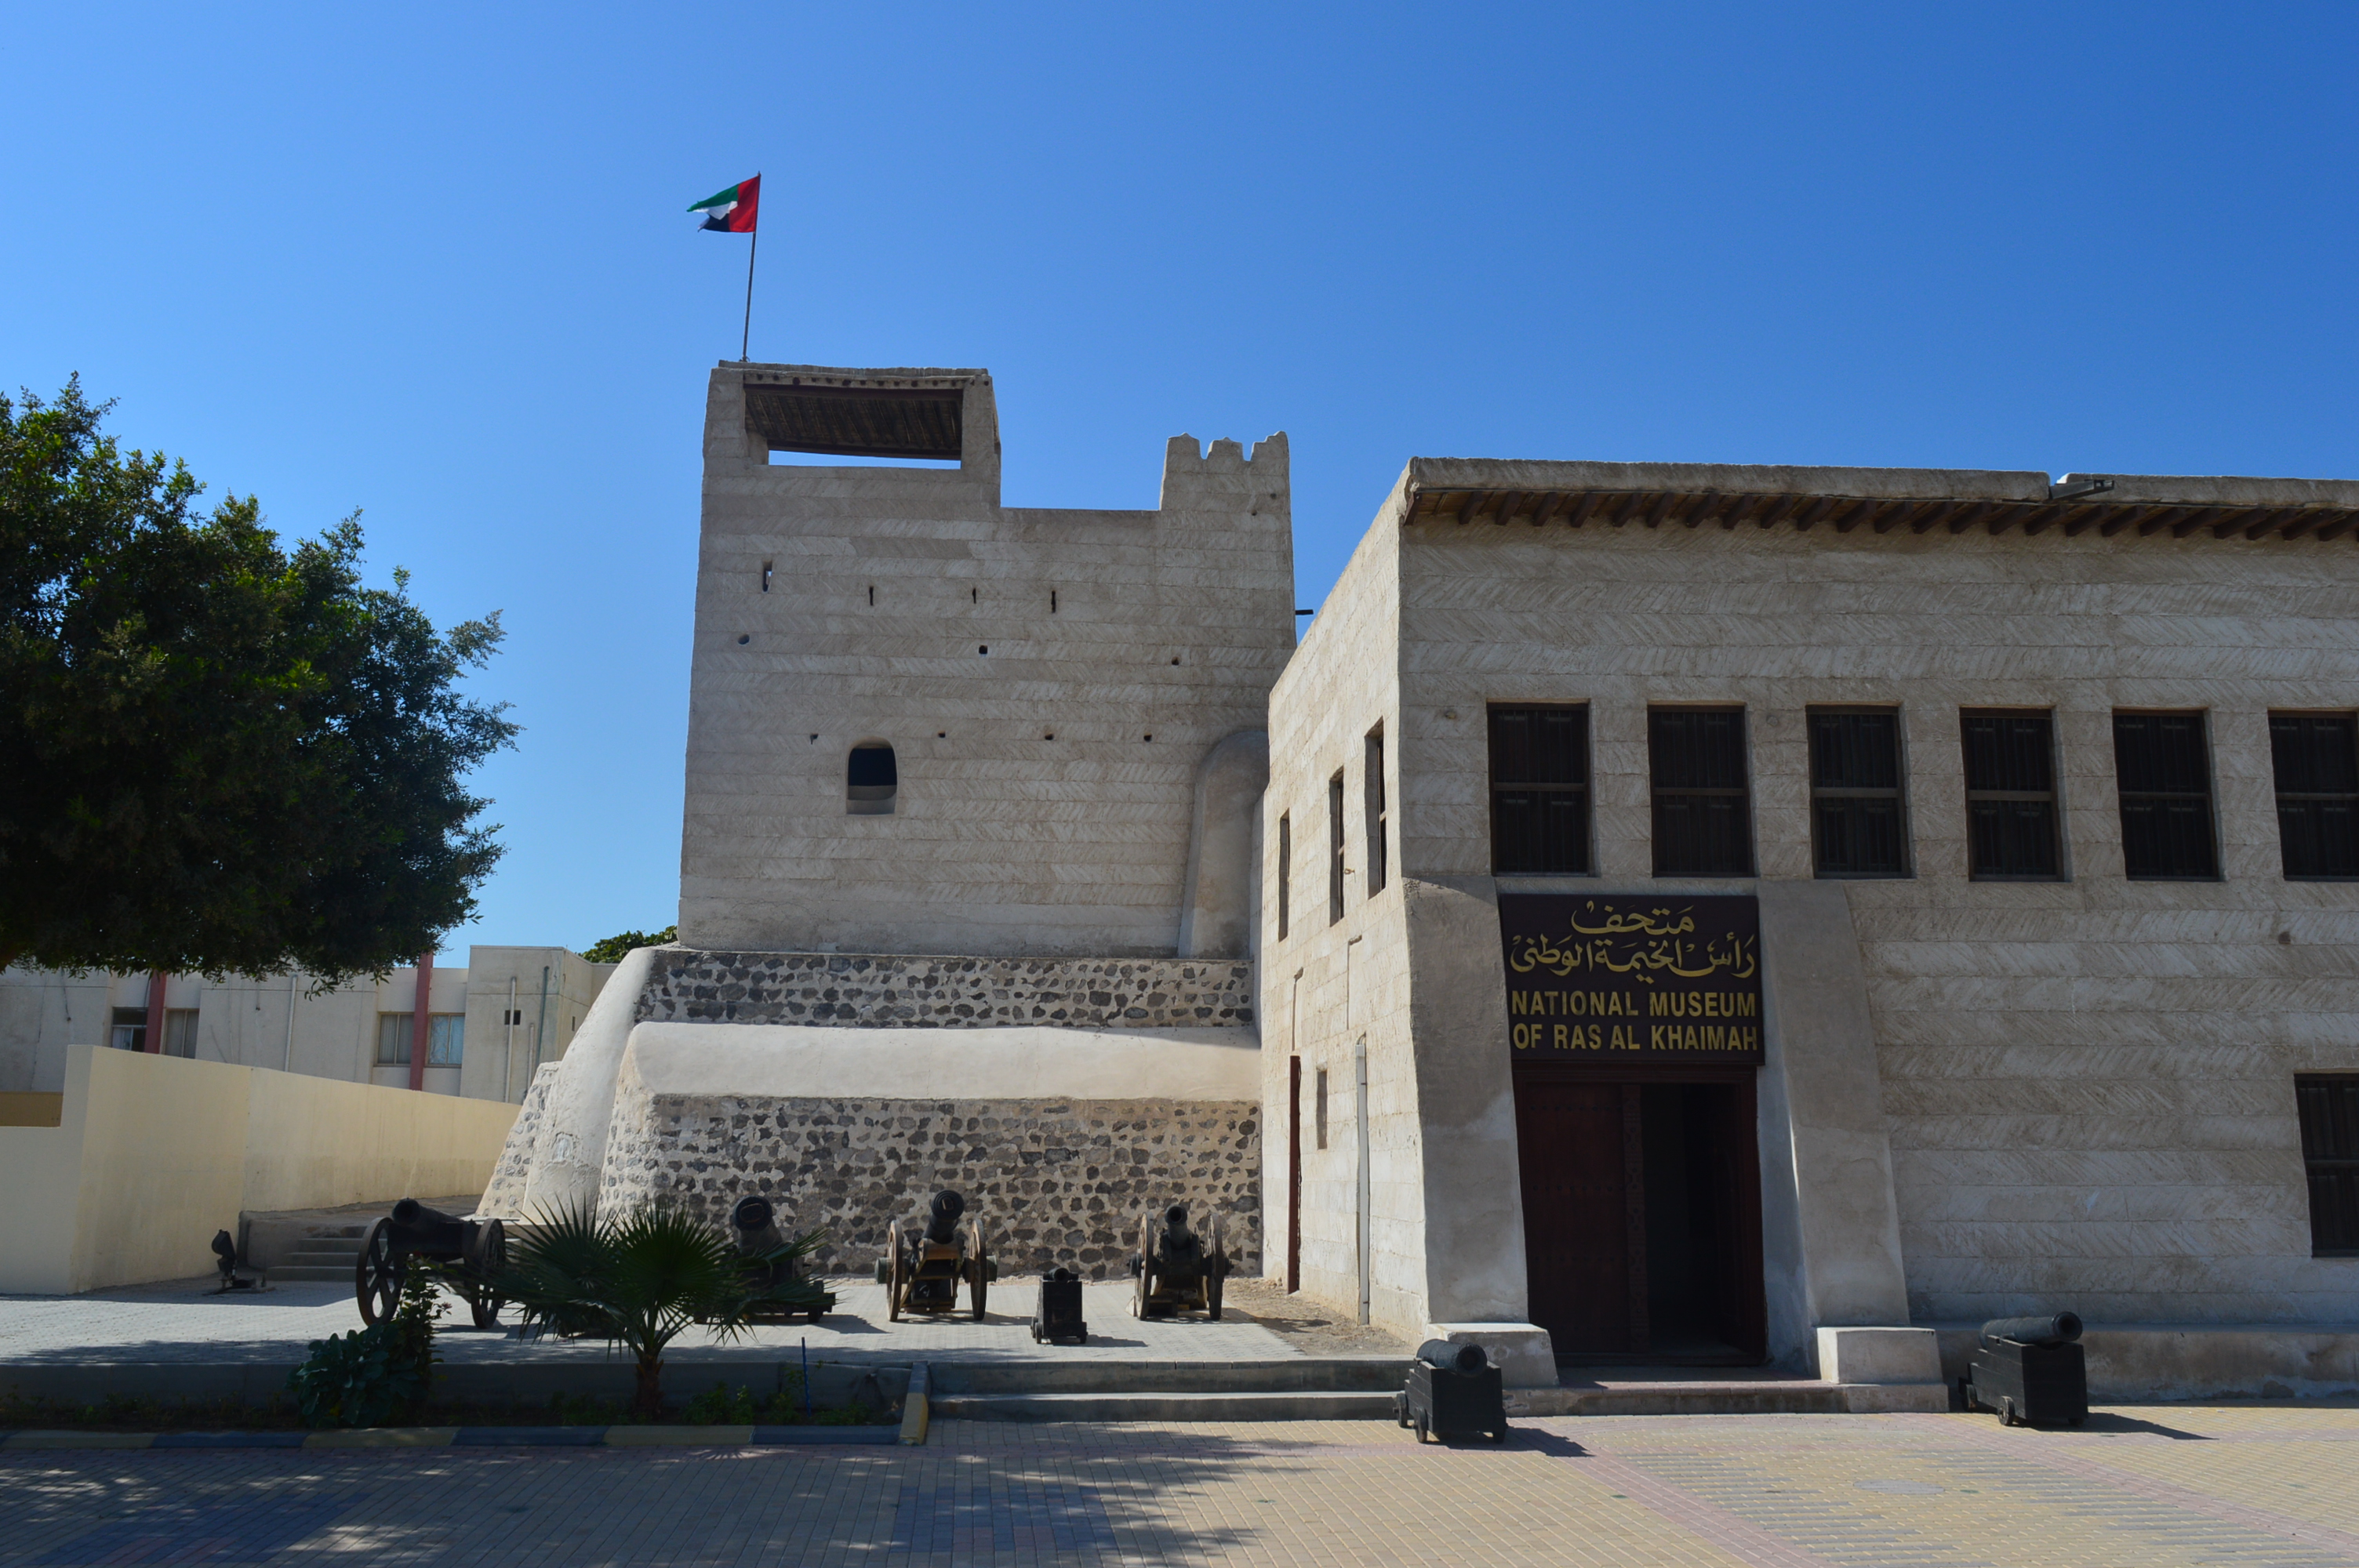 Picture of the Ras Al Khaimah National Museum's front: a traditional Emirati building with a courtyard, arched doorways, and white stone walls.